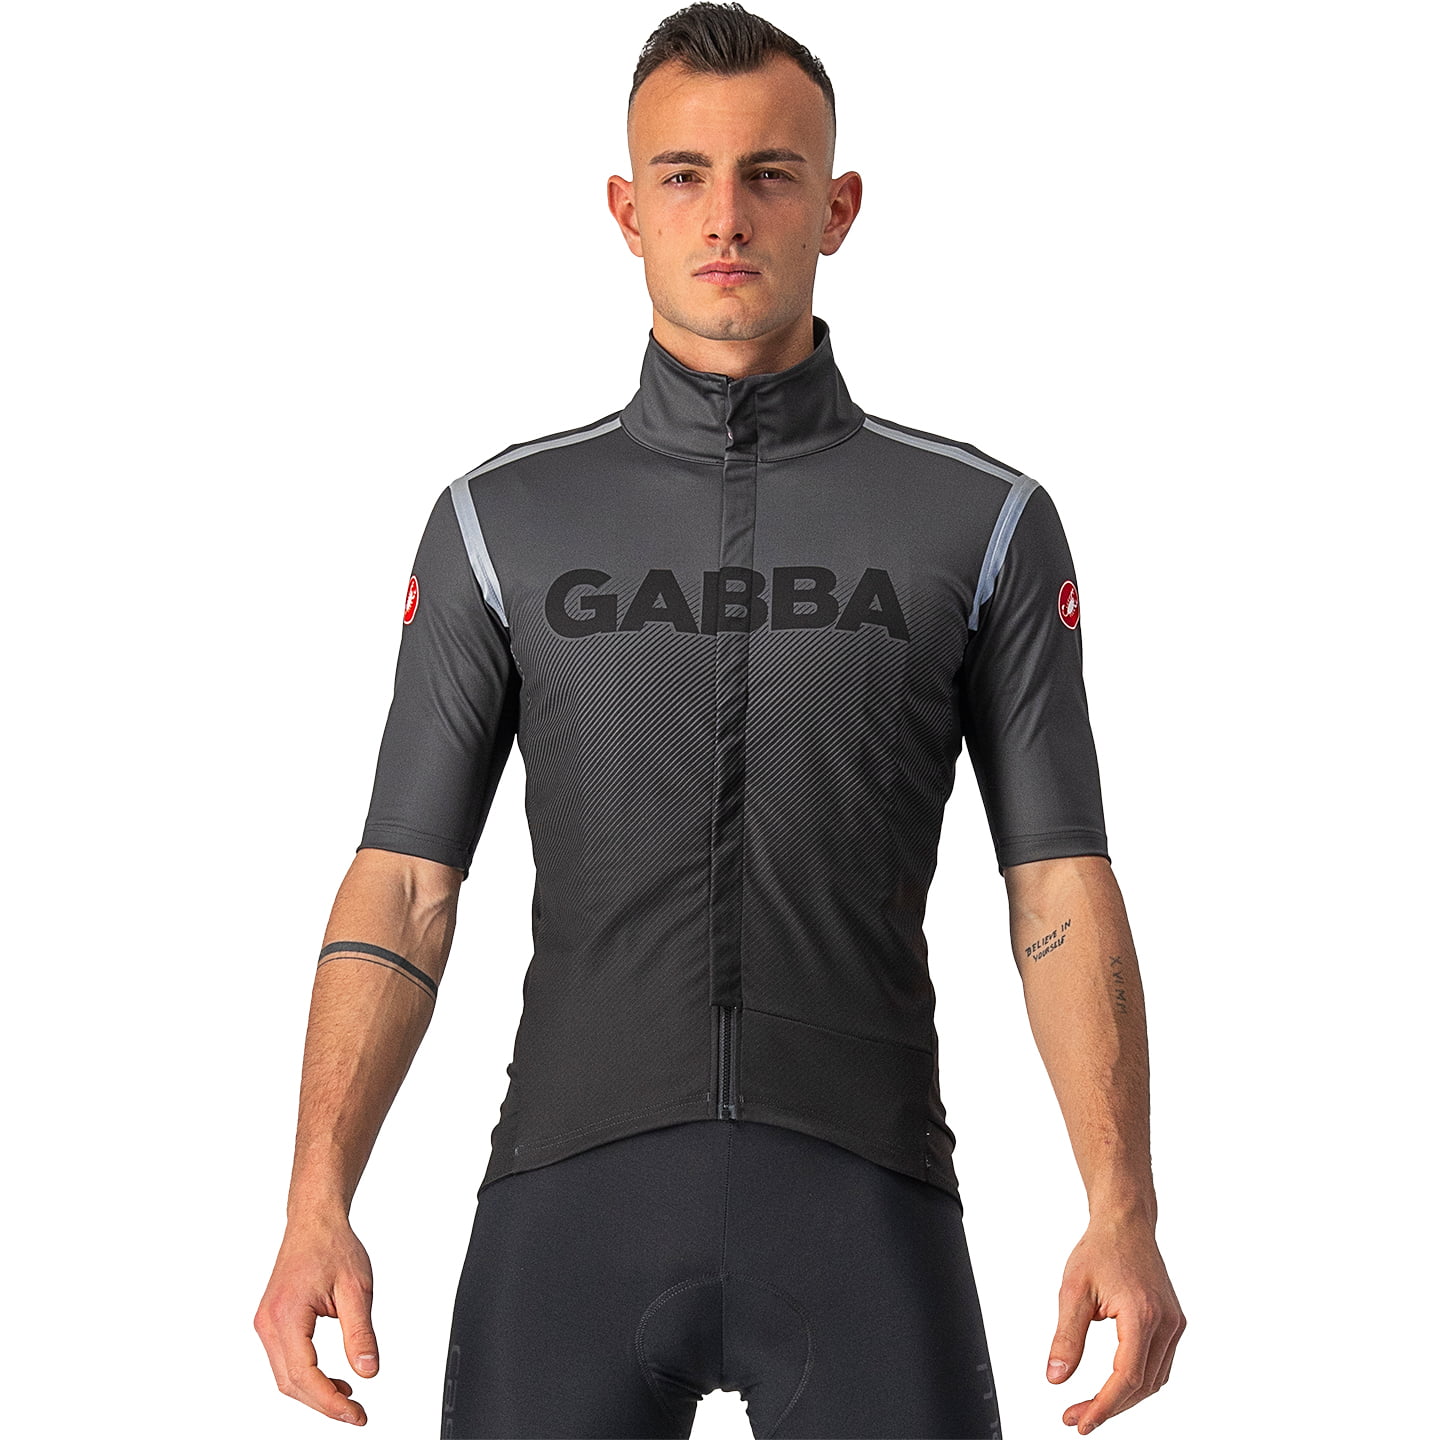 CASTELLI Gabba RoS Special Edition Short Sleeve Light Jacket Light Jacket, for men, size L, Cycle jacket, Cycle clothing